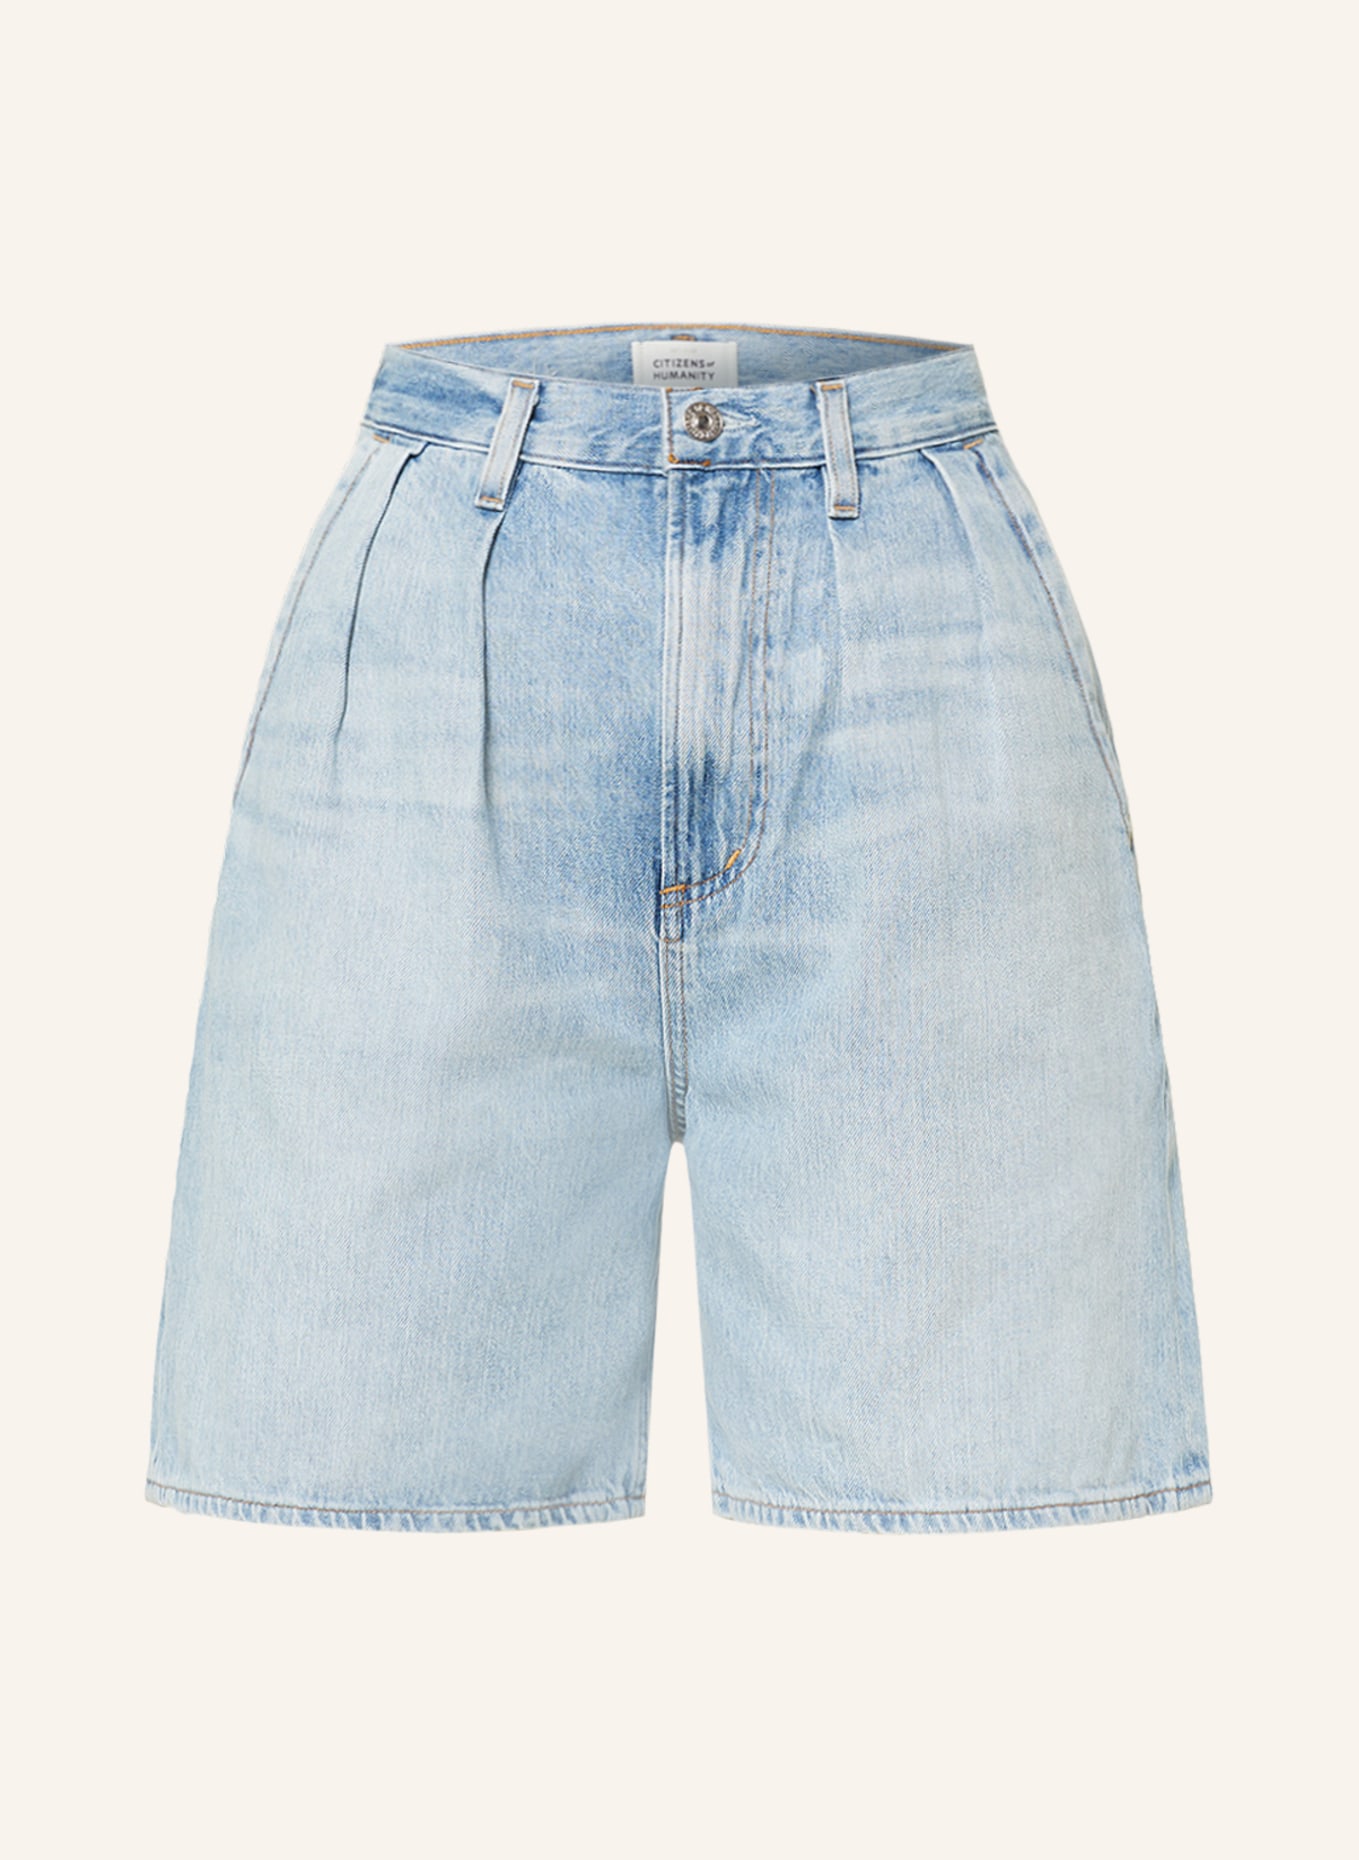 CITIZENS of HUMANITY Denim shorts MARITZY, Color: LIGHT BLUE (Image 1)